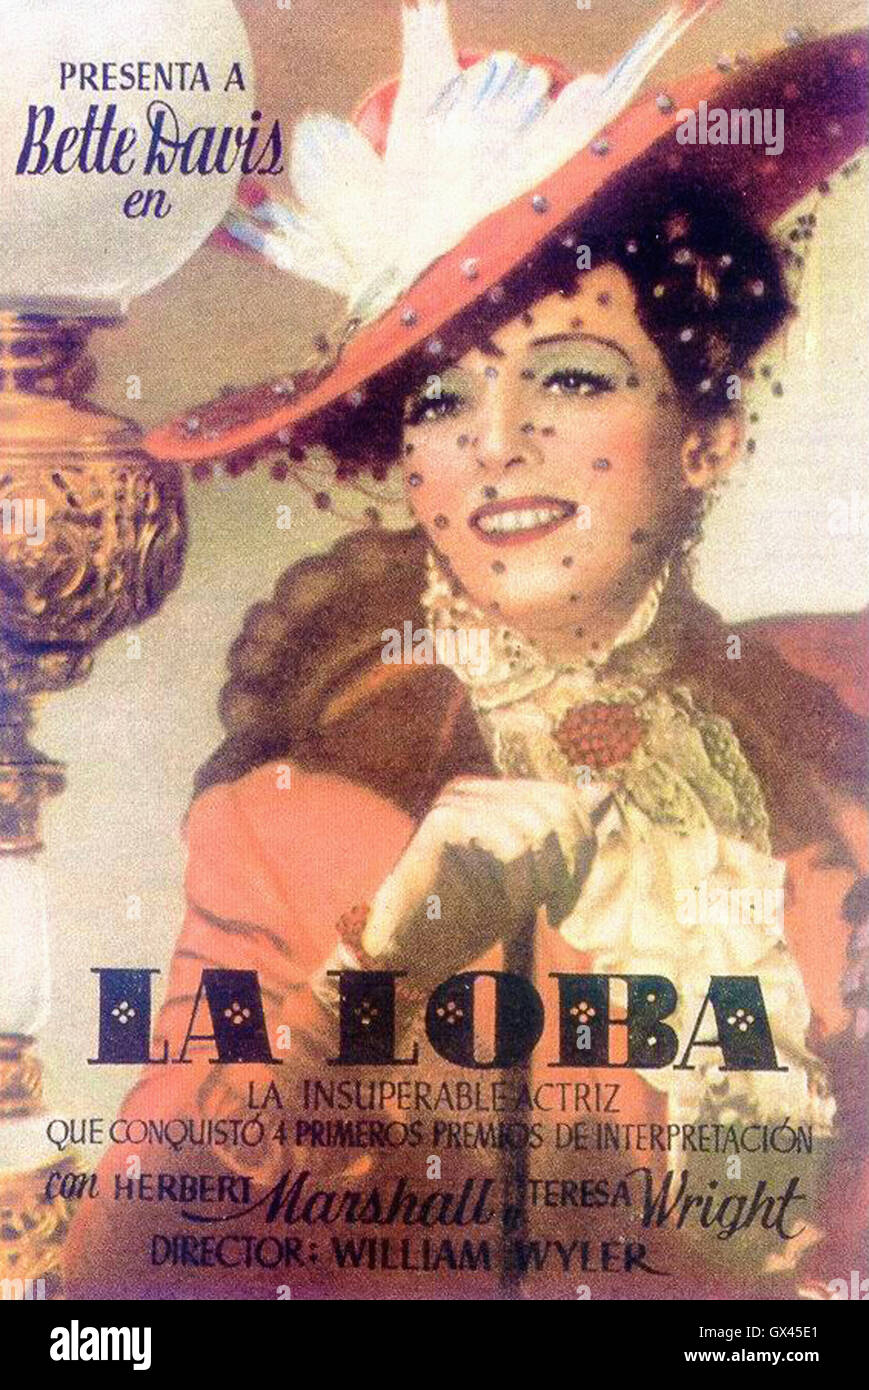 Bette Davis - THE LITTLE FOXES - 1941.  Directed by William Wyler - Spanish Movie Poster - La Loba Stock Photo